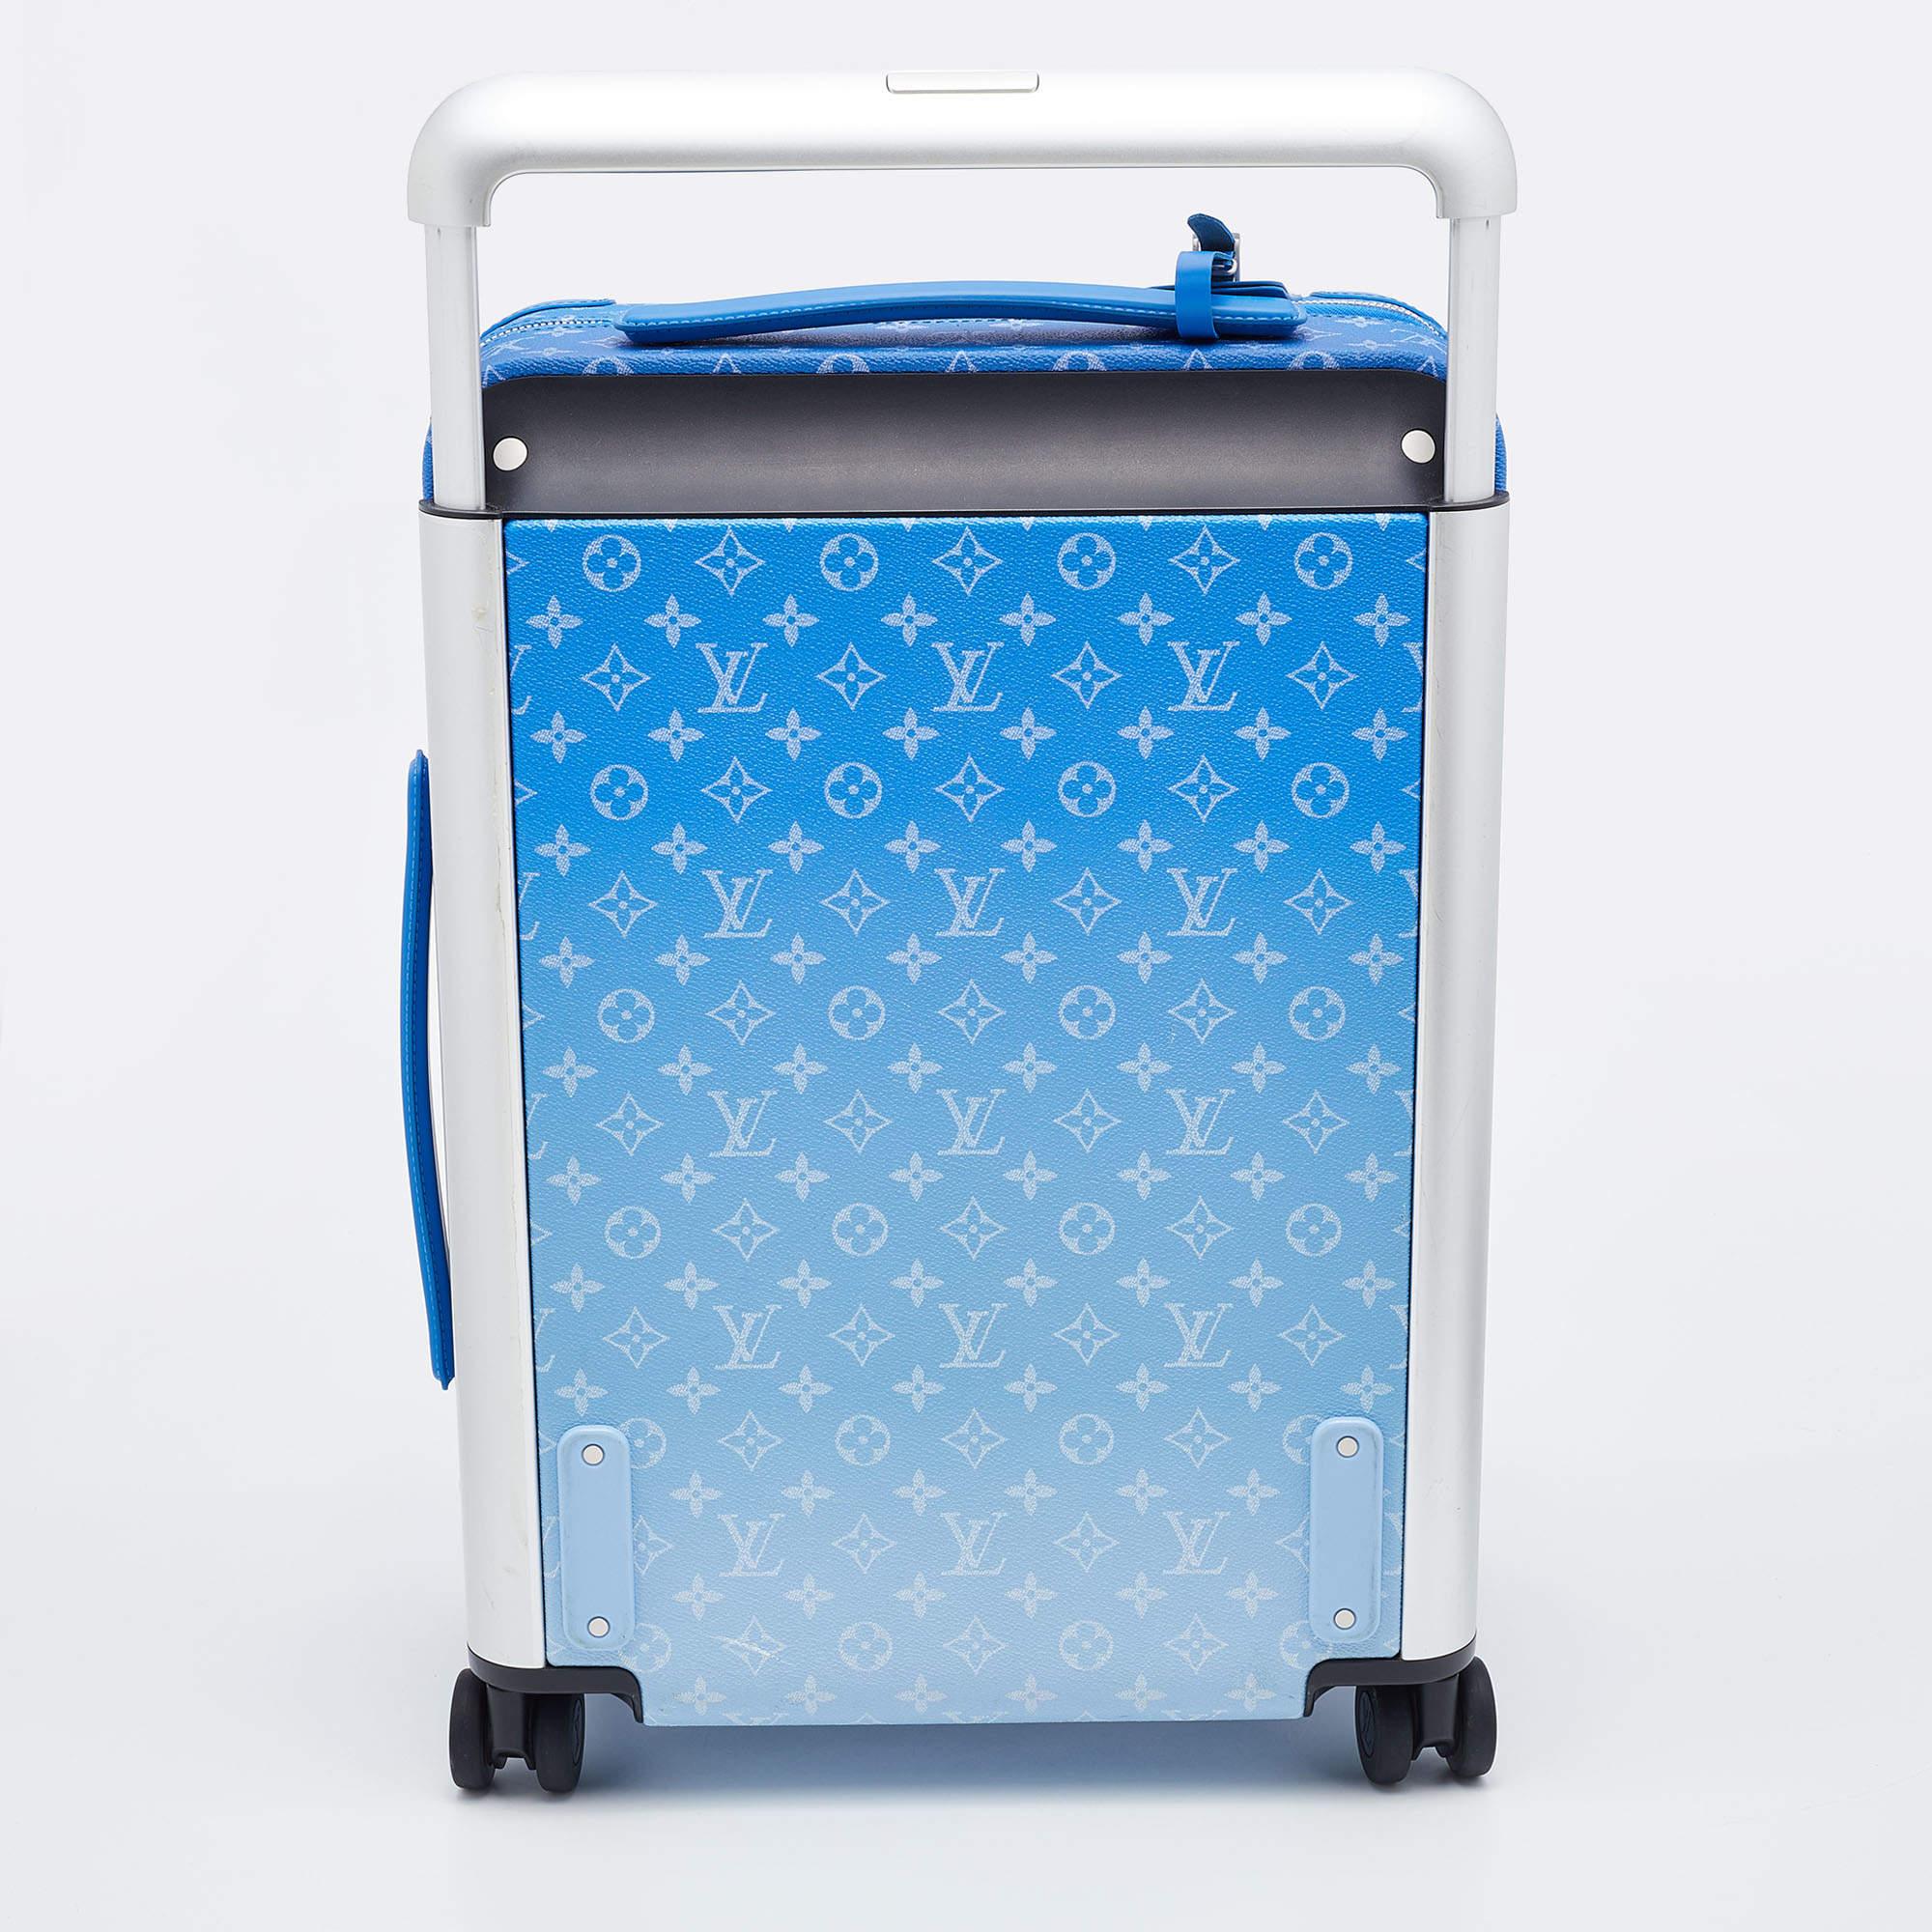 Match your travel essentials to your personal style with this luxurious designer suitcase from Louis Vuitton. It is the Louis Vuitton Monogram Clouds Horizon 55 in a dreamy blue. It has four wheels, a telescopic handle, and a matching luggage